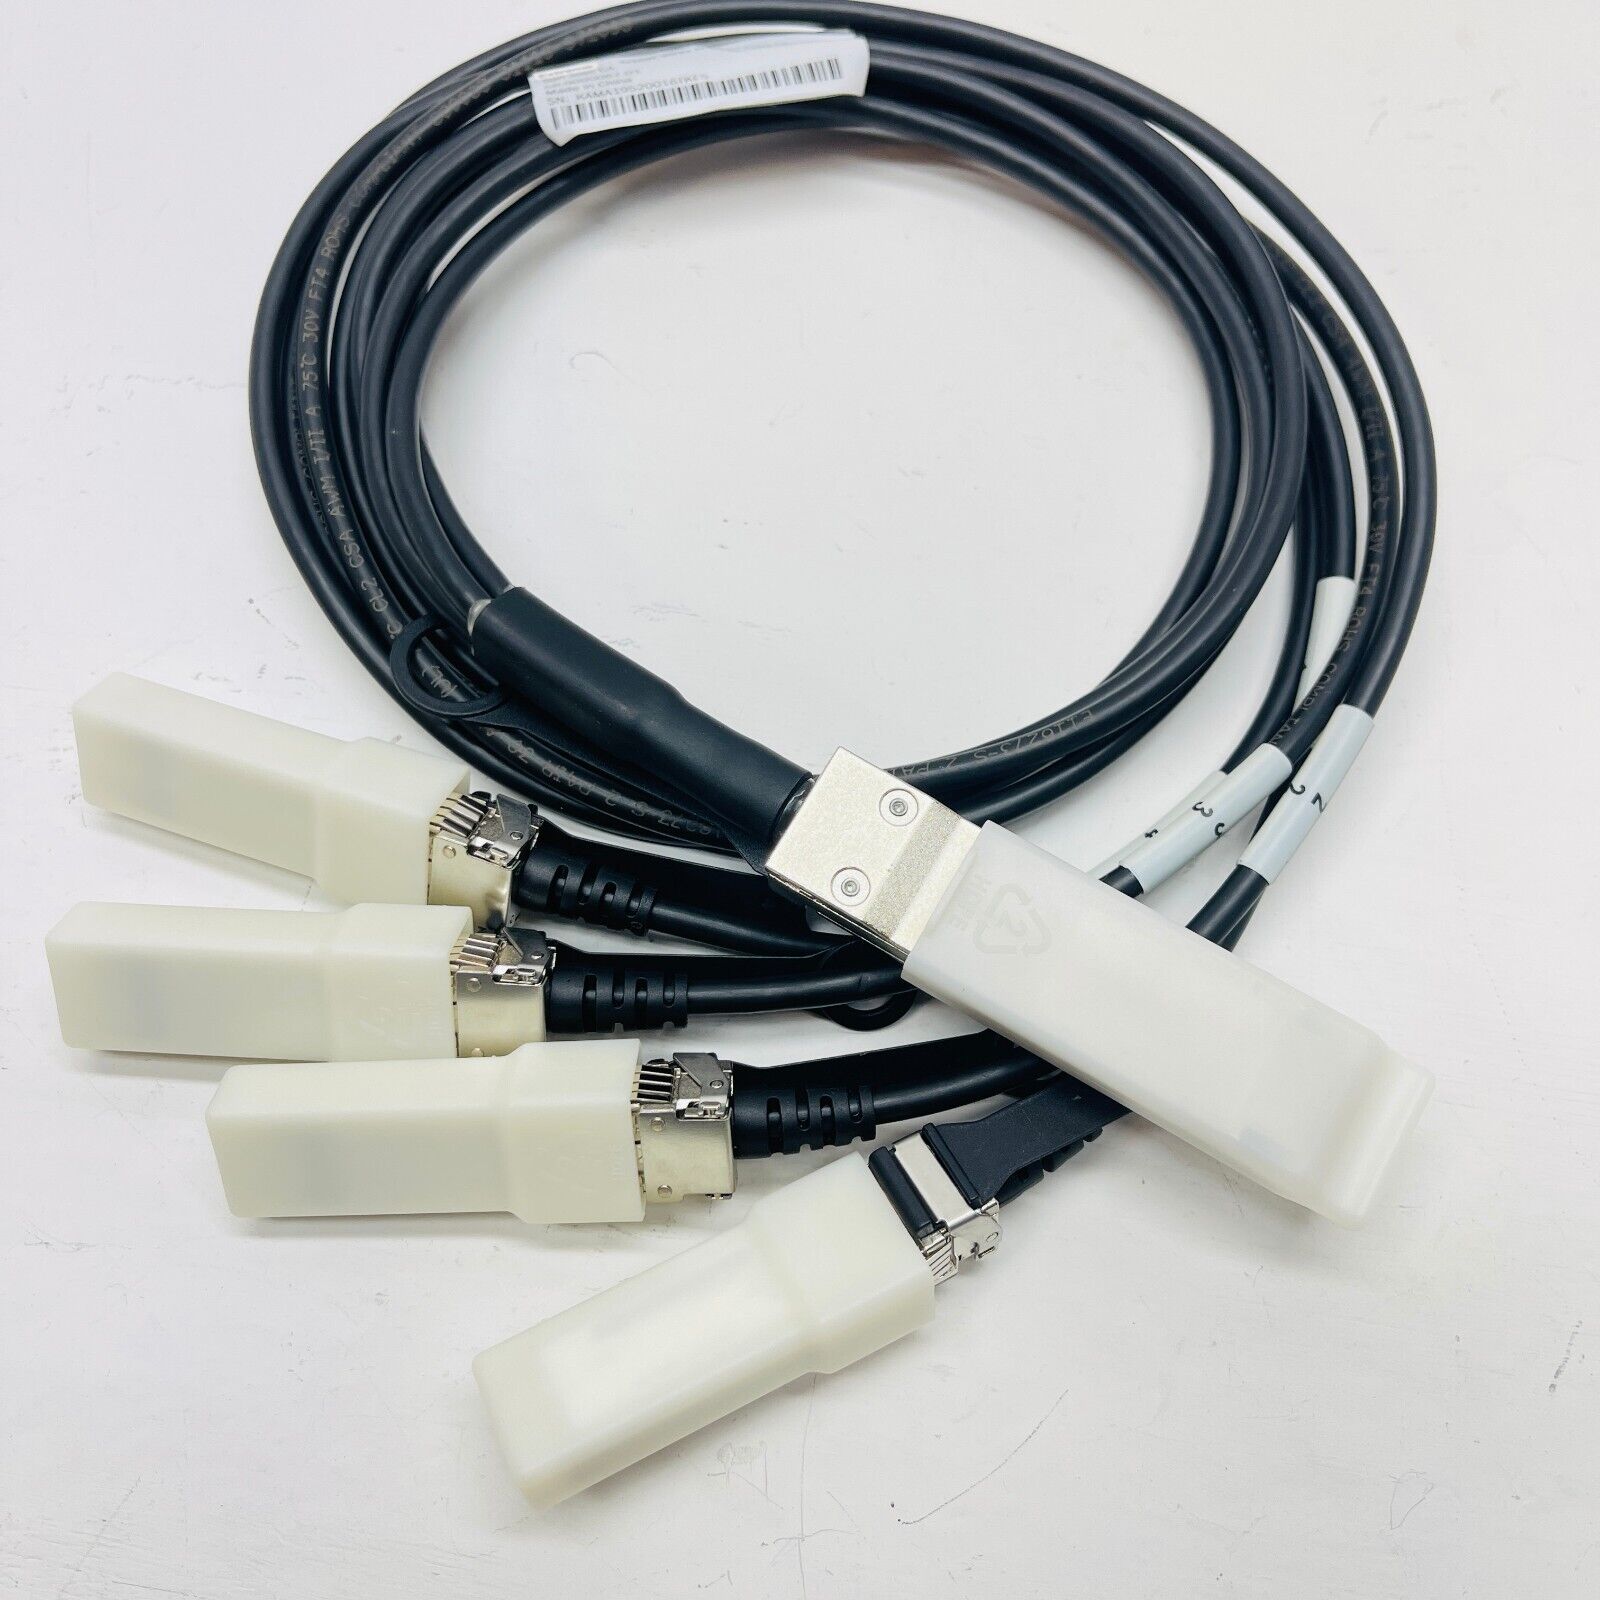 58-0000067-01 Extreme Brocade 4X10GE QSFP+ T0 4SFP+CABLE 1M NEW~